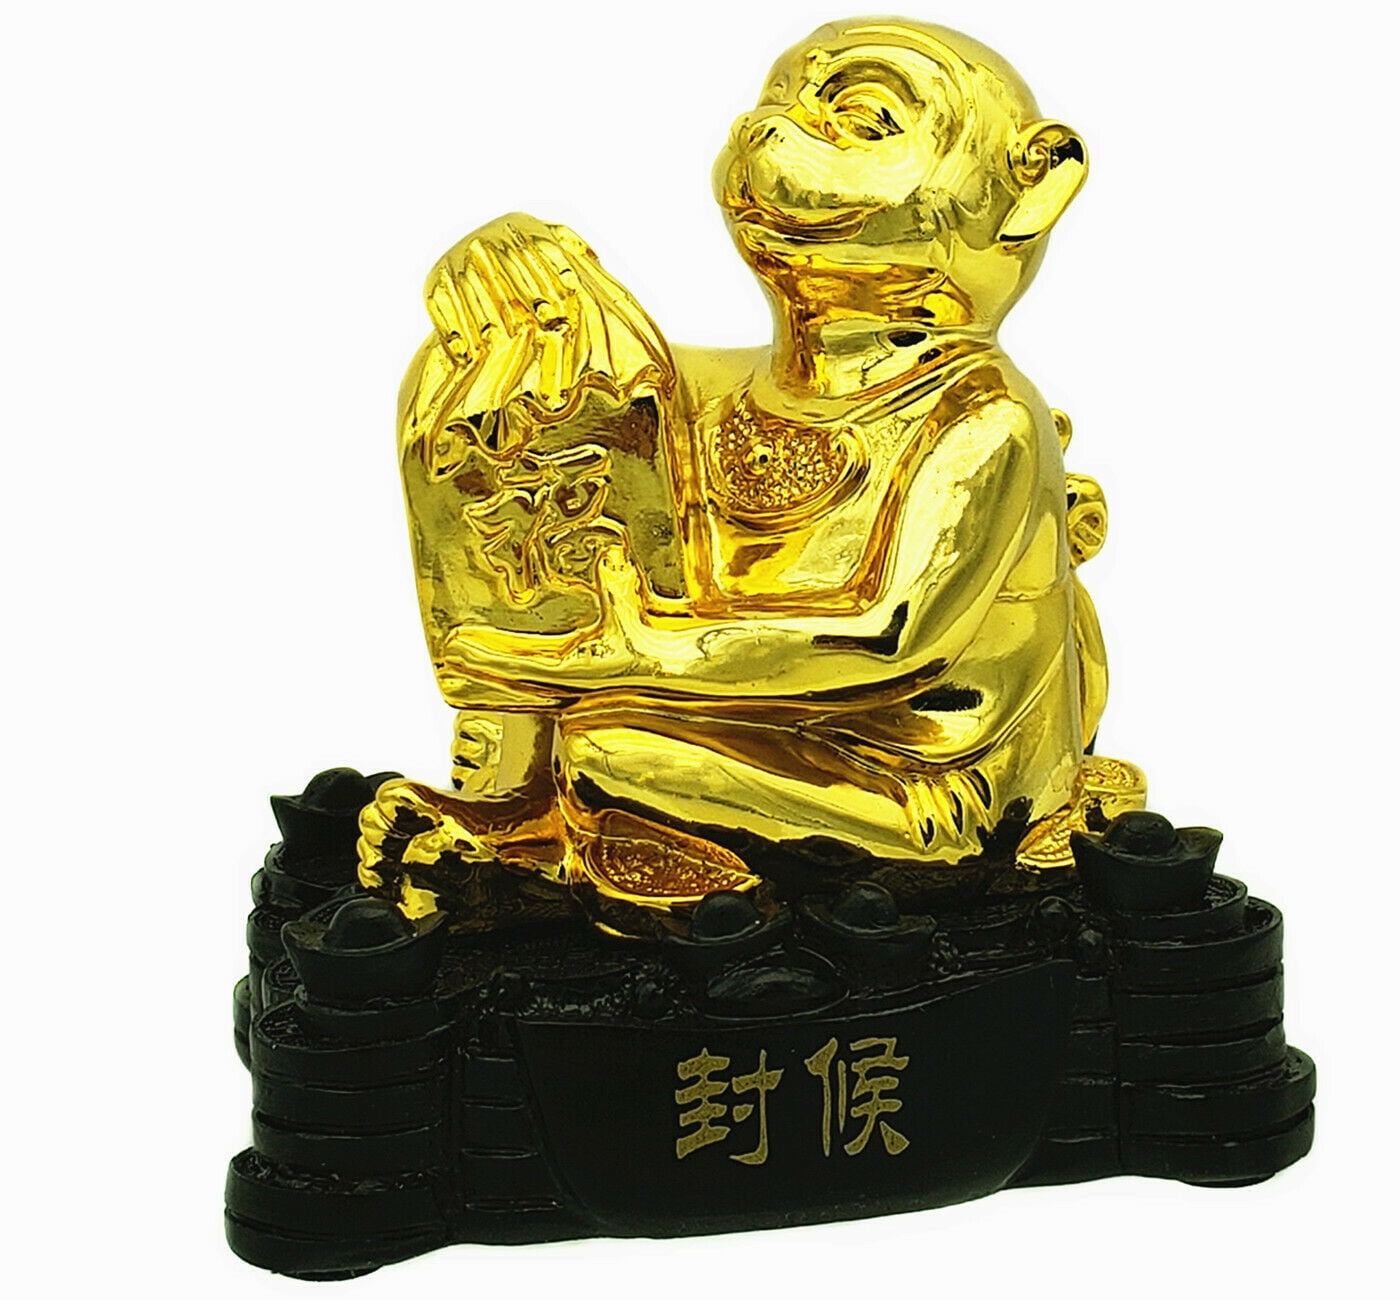 Feng Shui 4.5" Gold Rooster Crystal Base Figure Chinese New Year Zodiac Gift US 